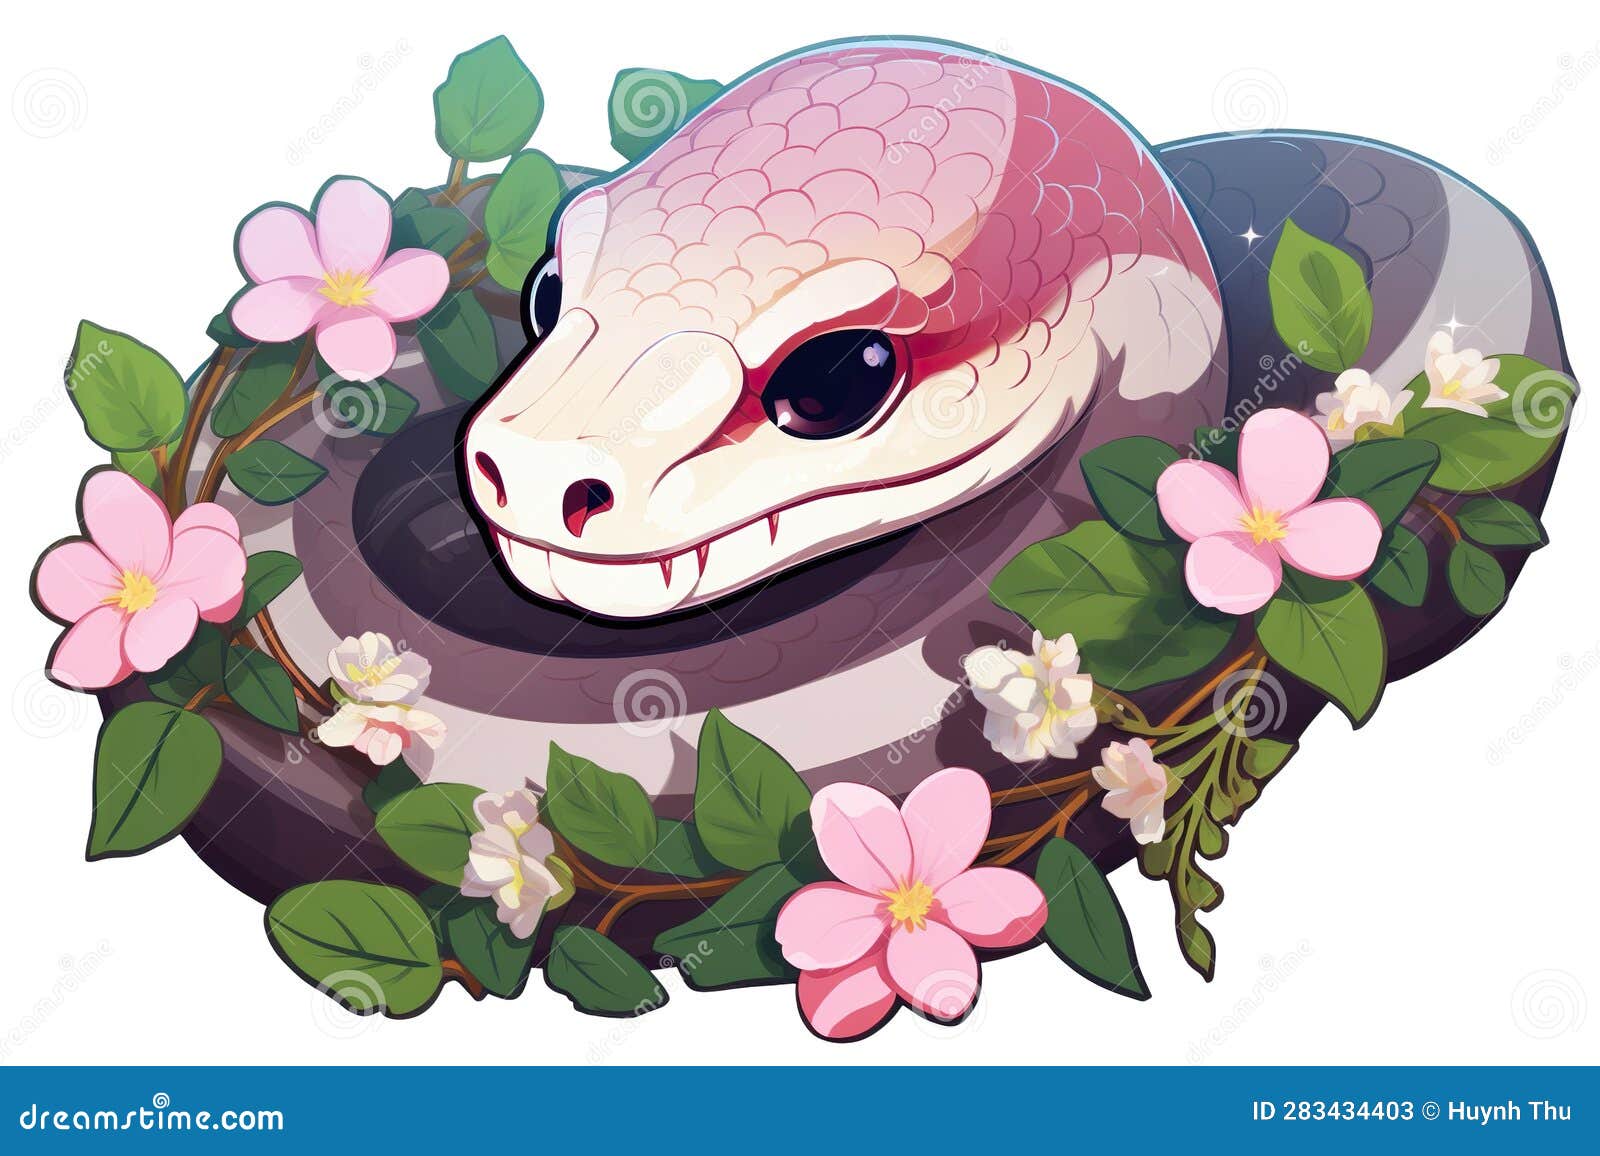 Kawaii Cute Snakes Sticker Image, in the Style of Kawaii Art Stock ...